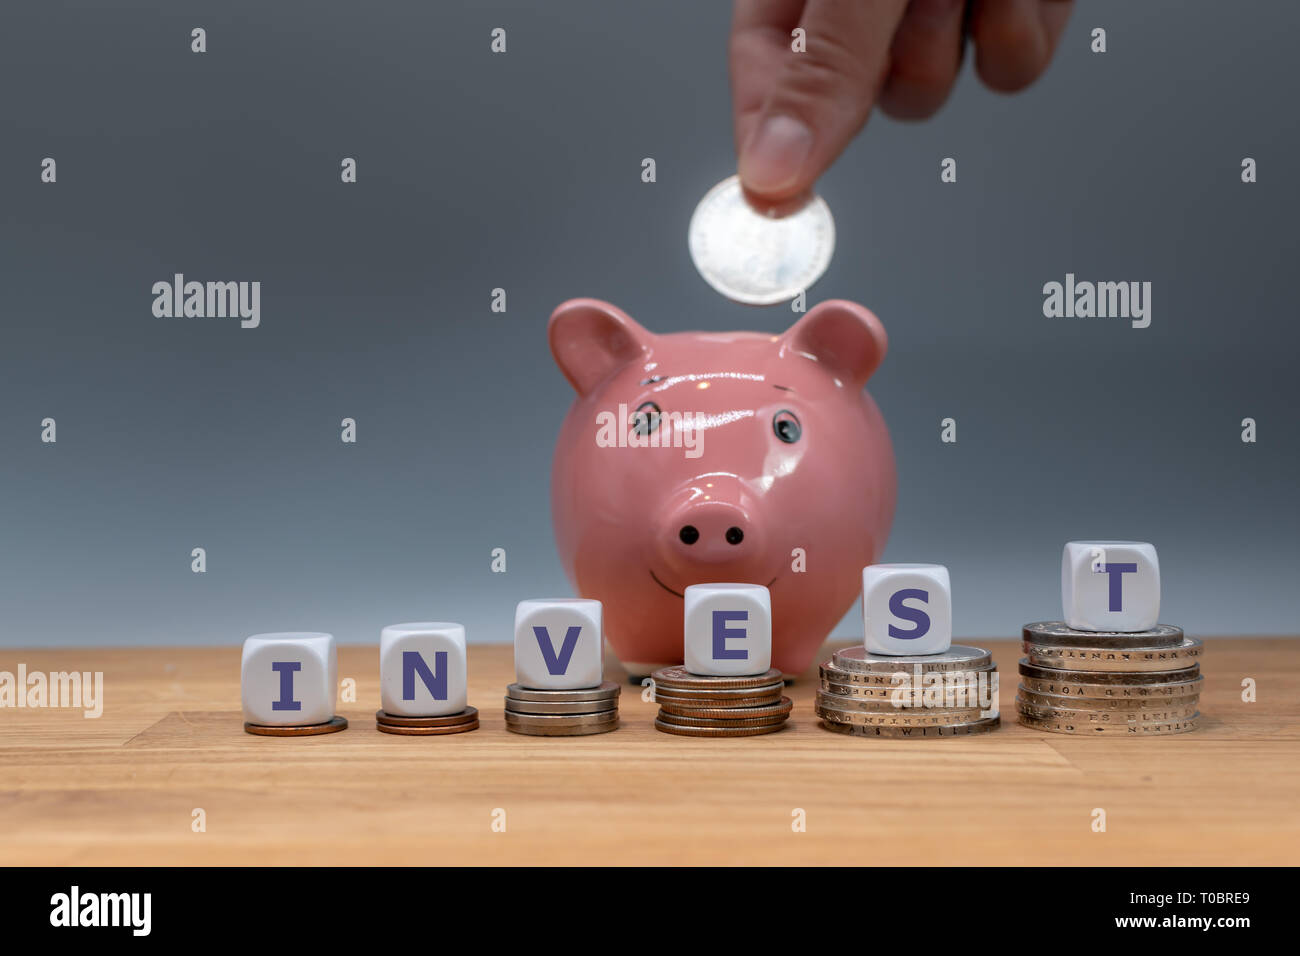 Dice form the word 'INVEST'. Dice placed on stacks of coins. A coin is put into a piggy bank in the background. Stock Photo